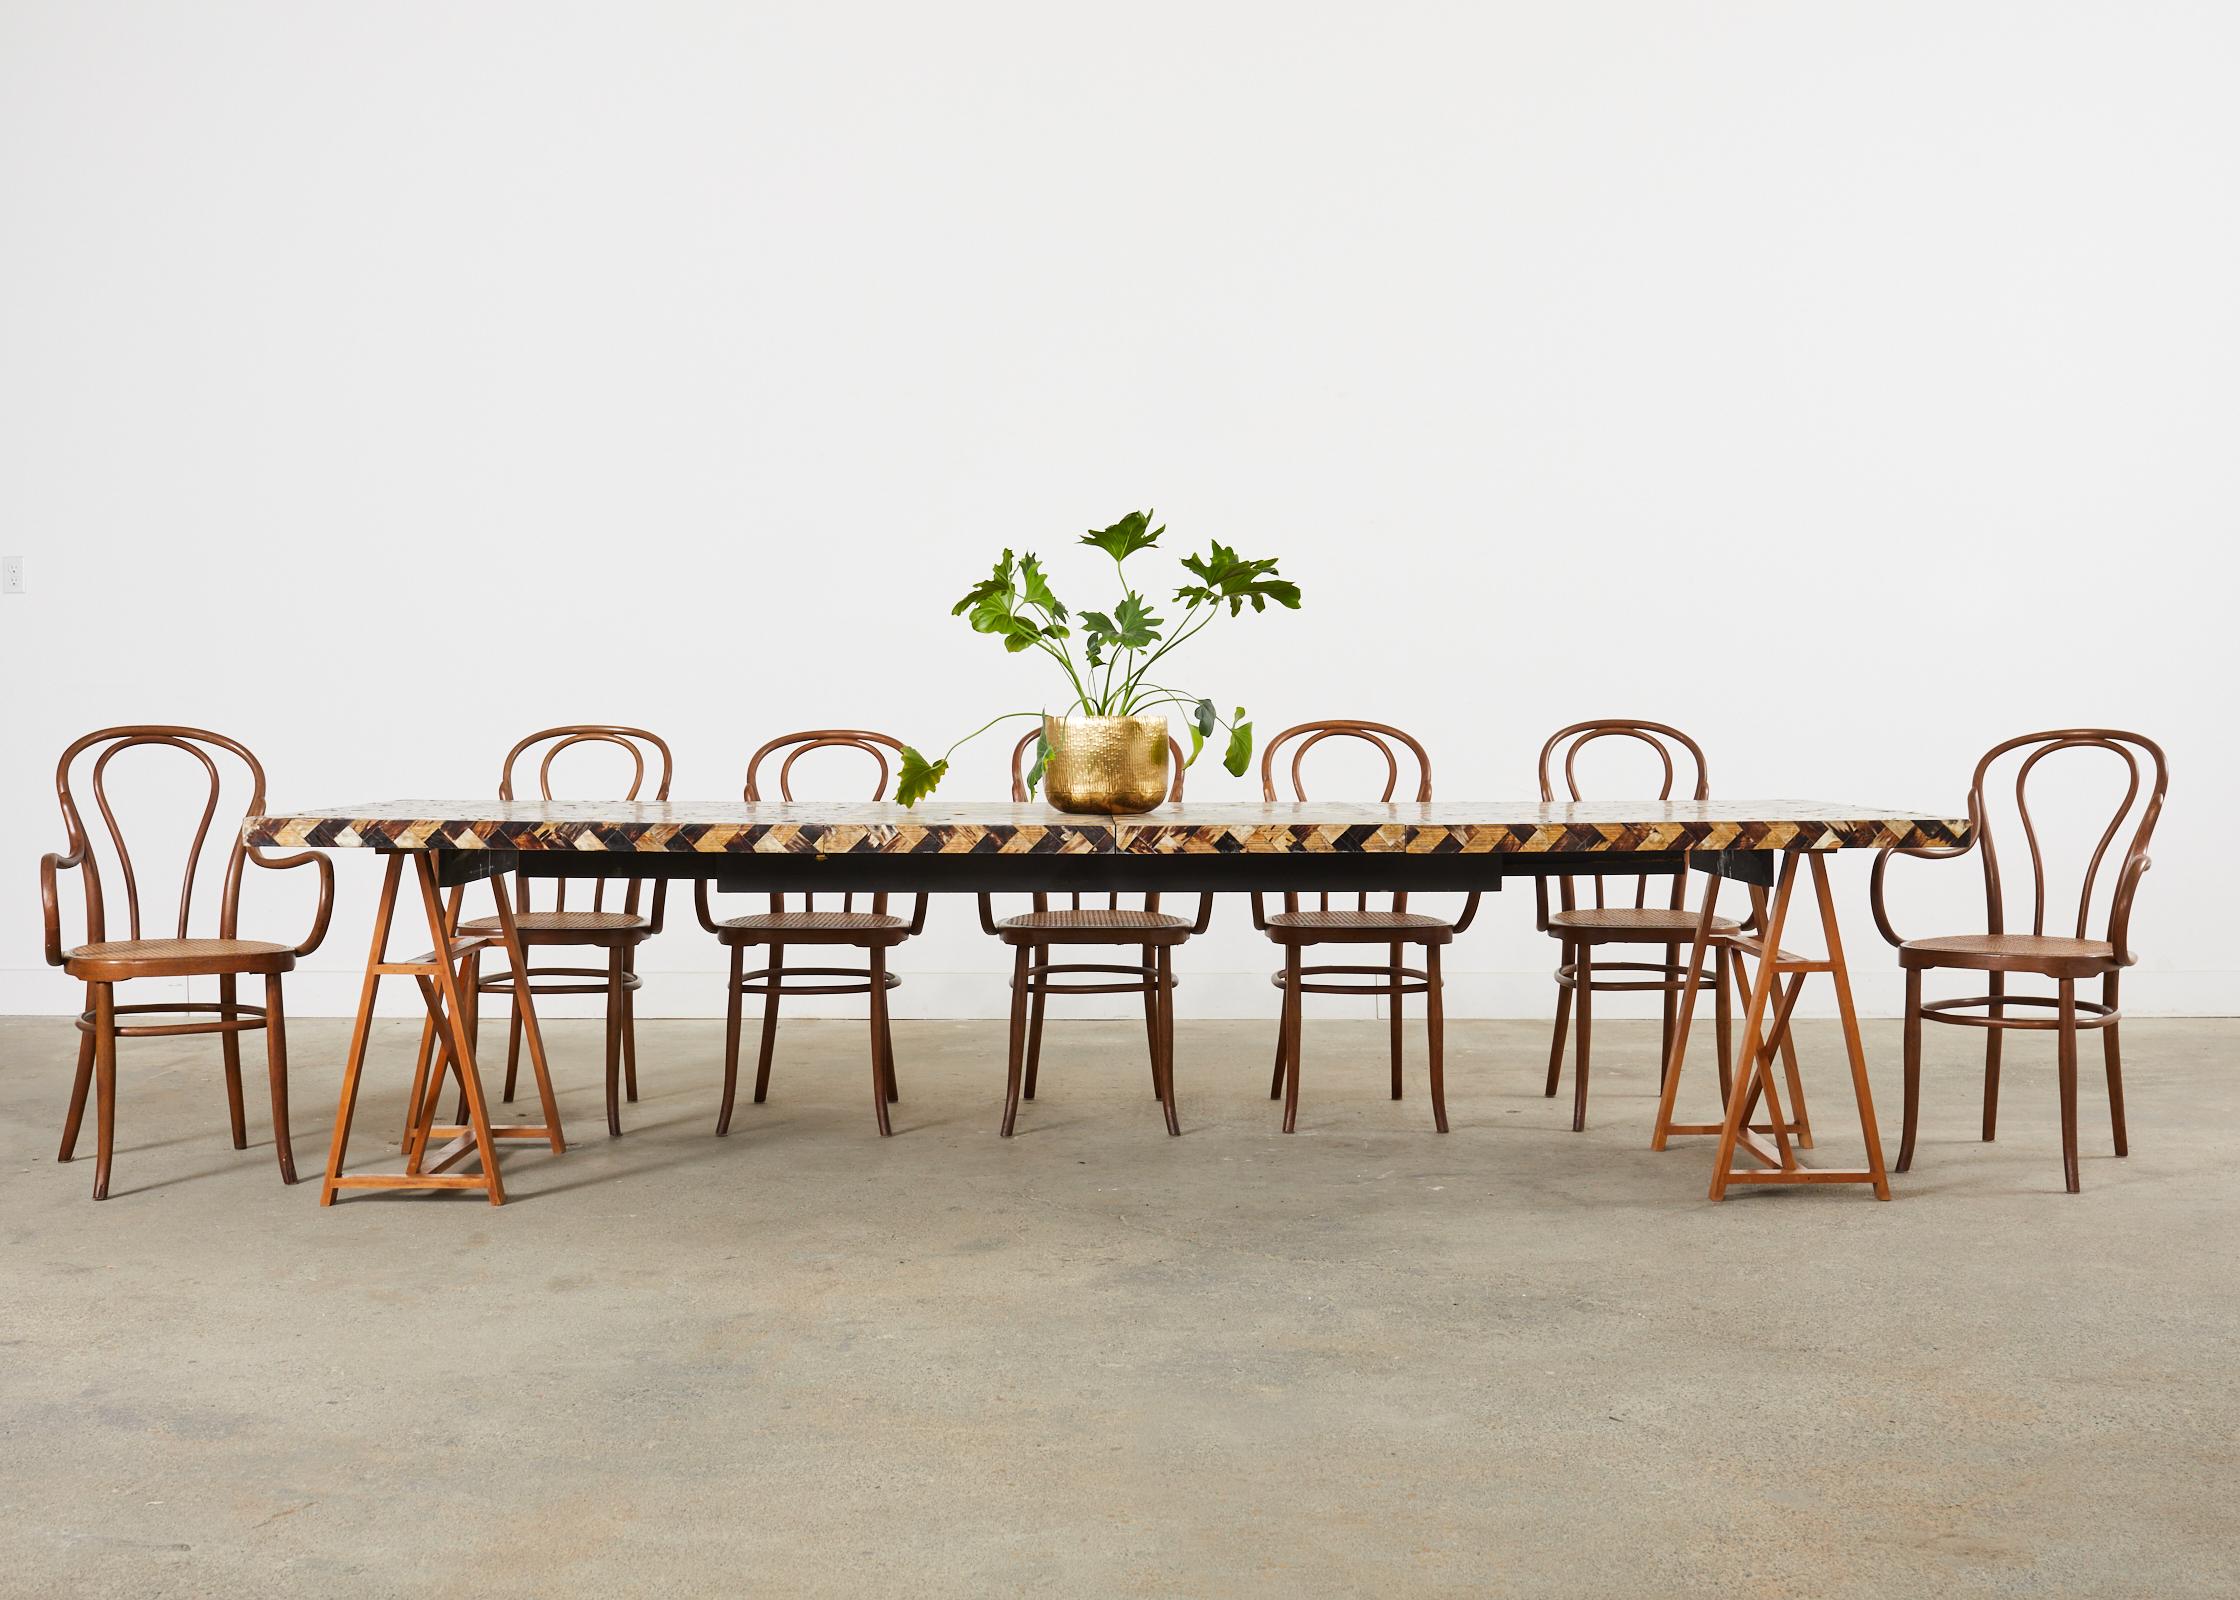 Remarkable and rare set of 10 matching labeled late 19th century bentwood bistro dining armchairs made by J and J Kohn Vienna, Austria. Each chair has an iconic bentwood frame with gracefully curved large arms. The seat is caned with J and J Kohn